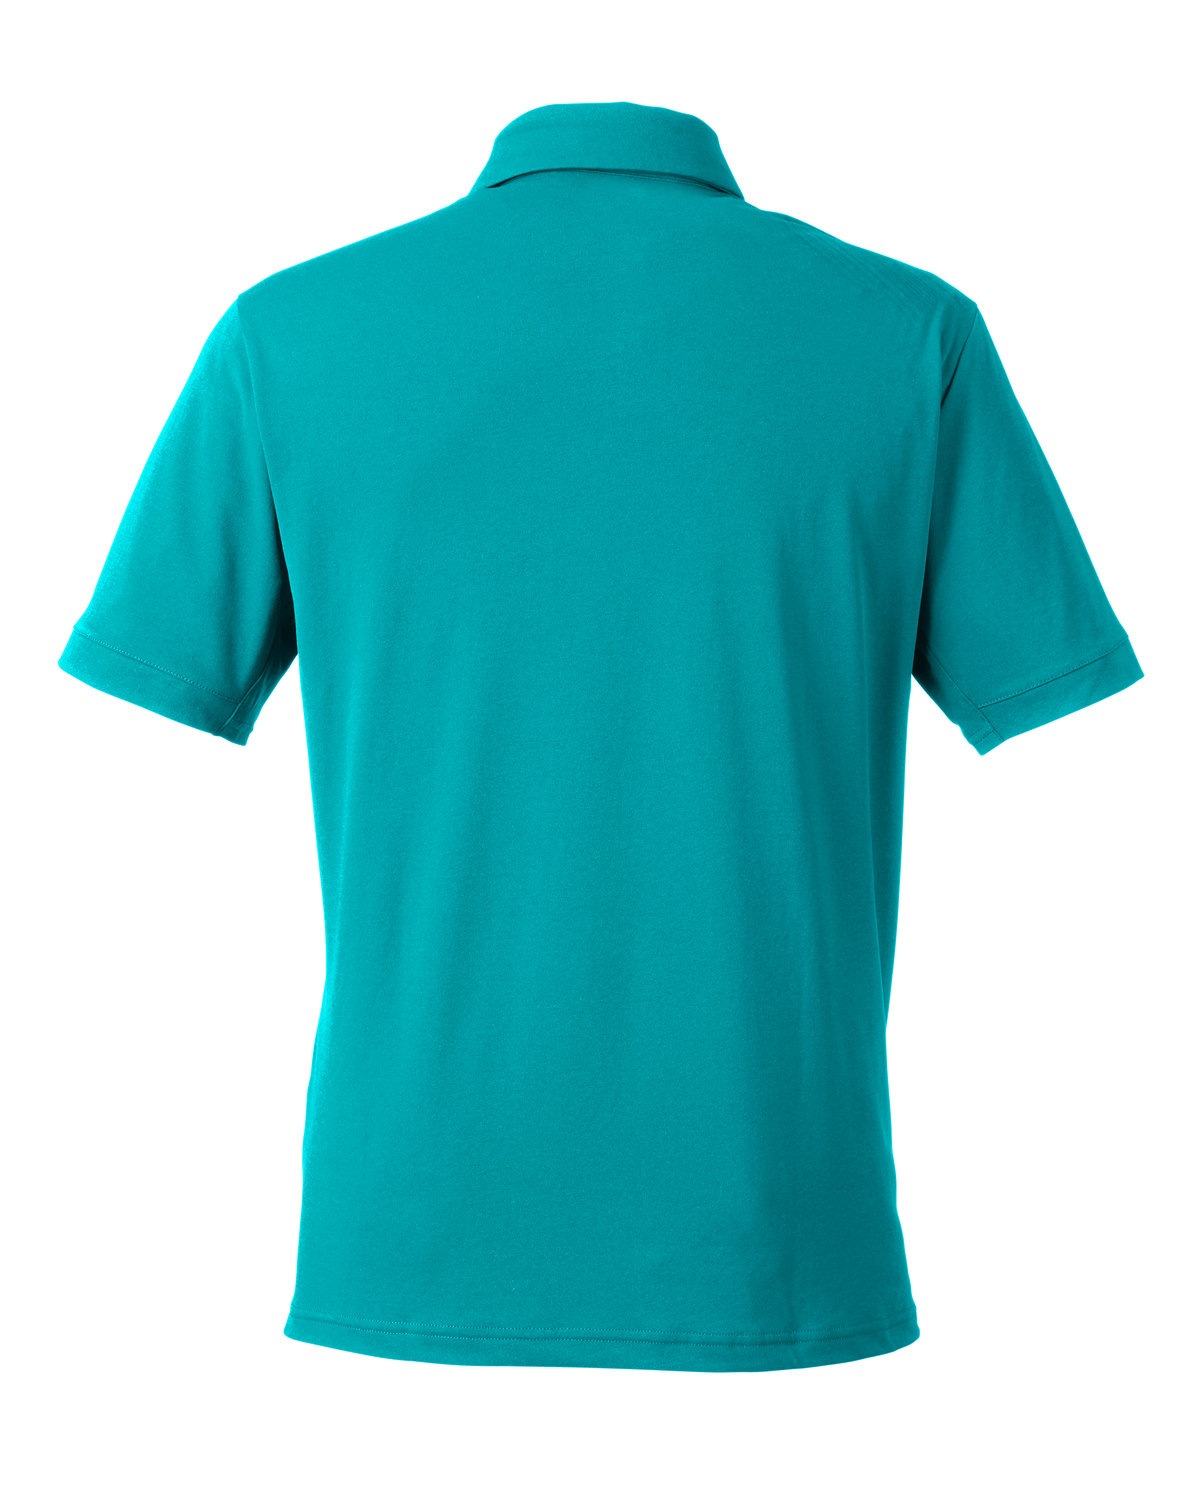 Under Armour Men's Title Polo | Generic Site - Priced